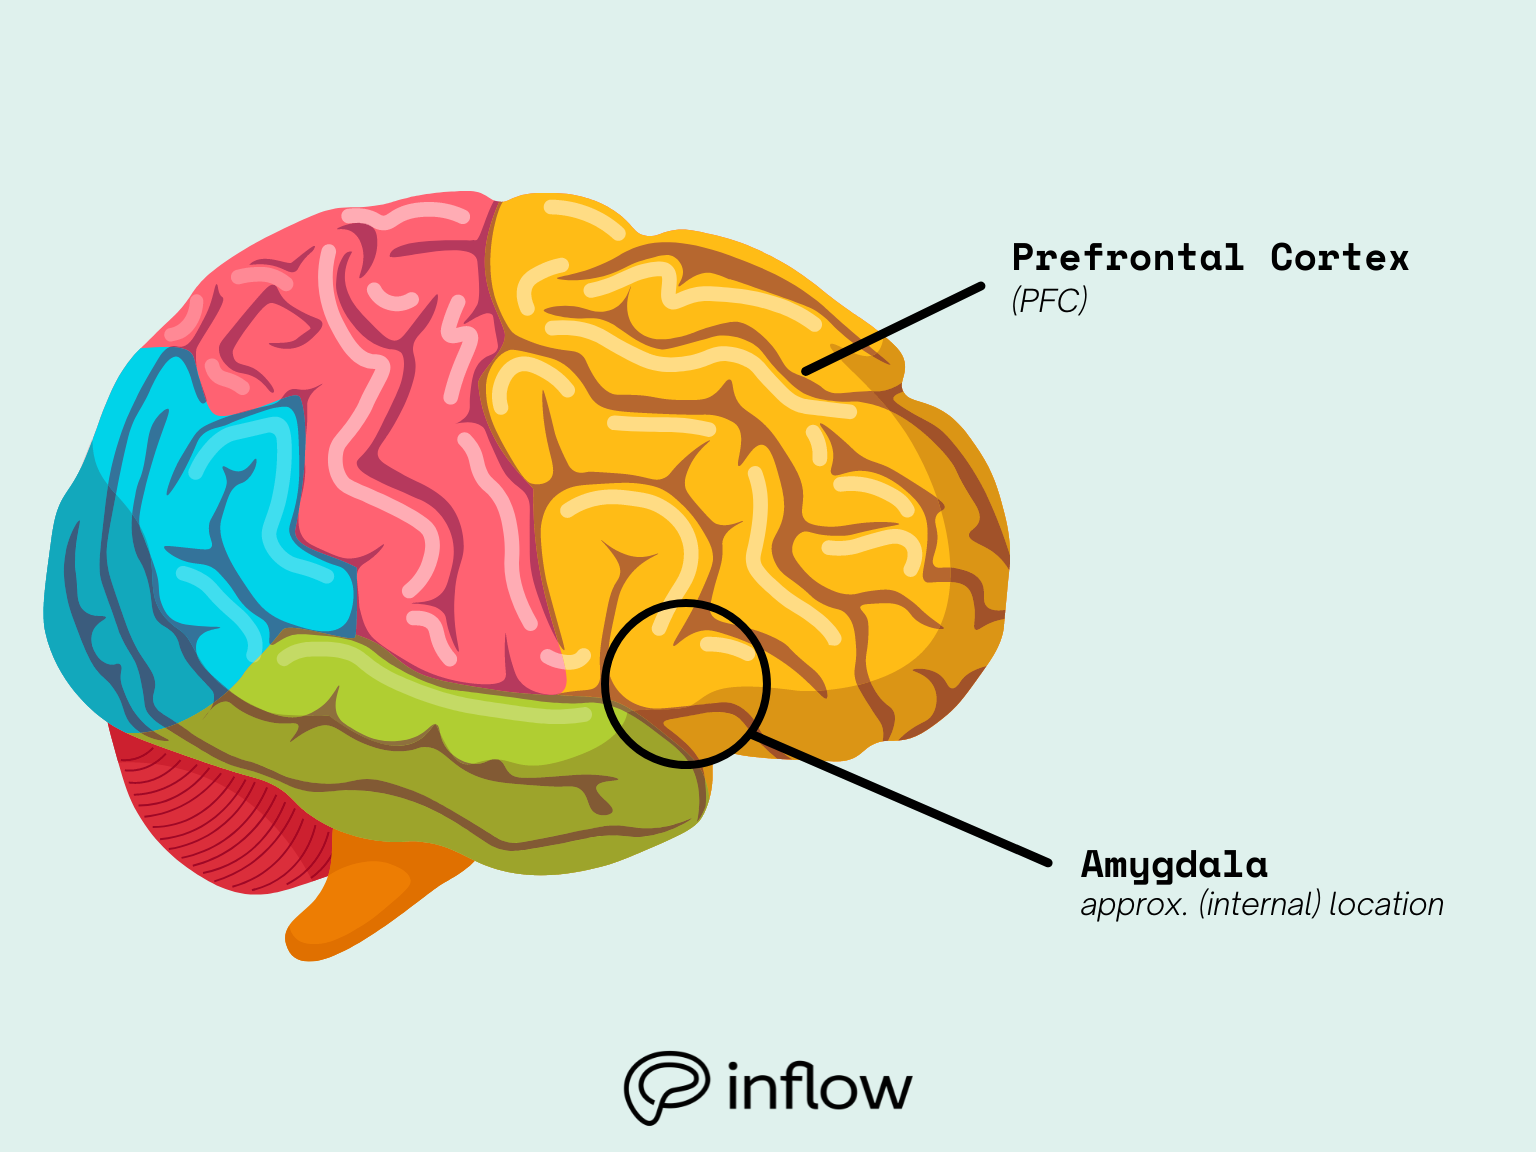 brain anatomy diagram that points out the location of the prefrontal cortex and the amygdala